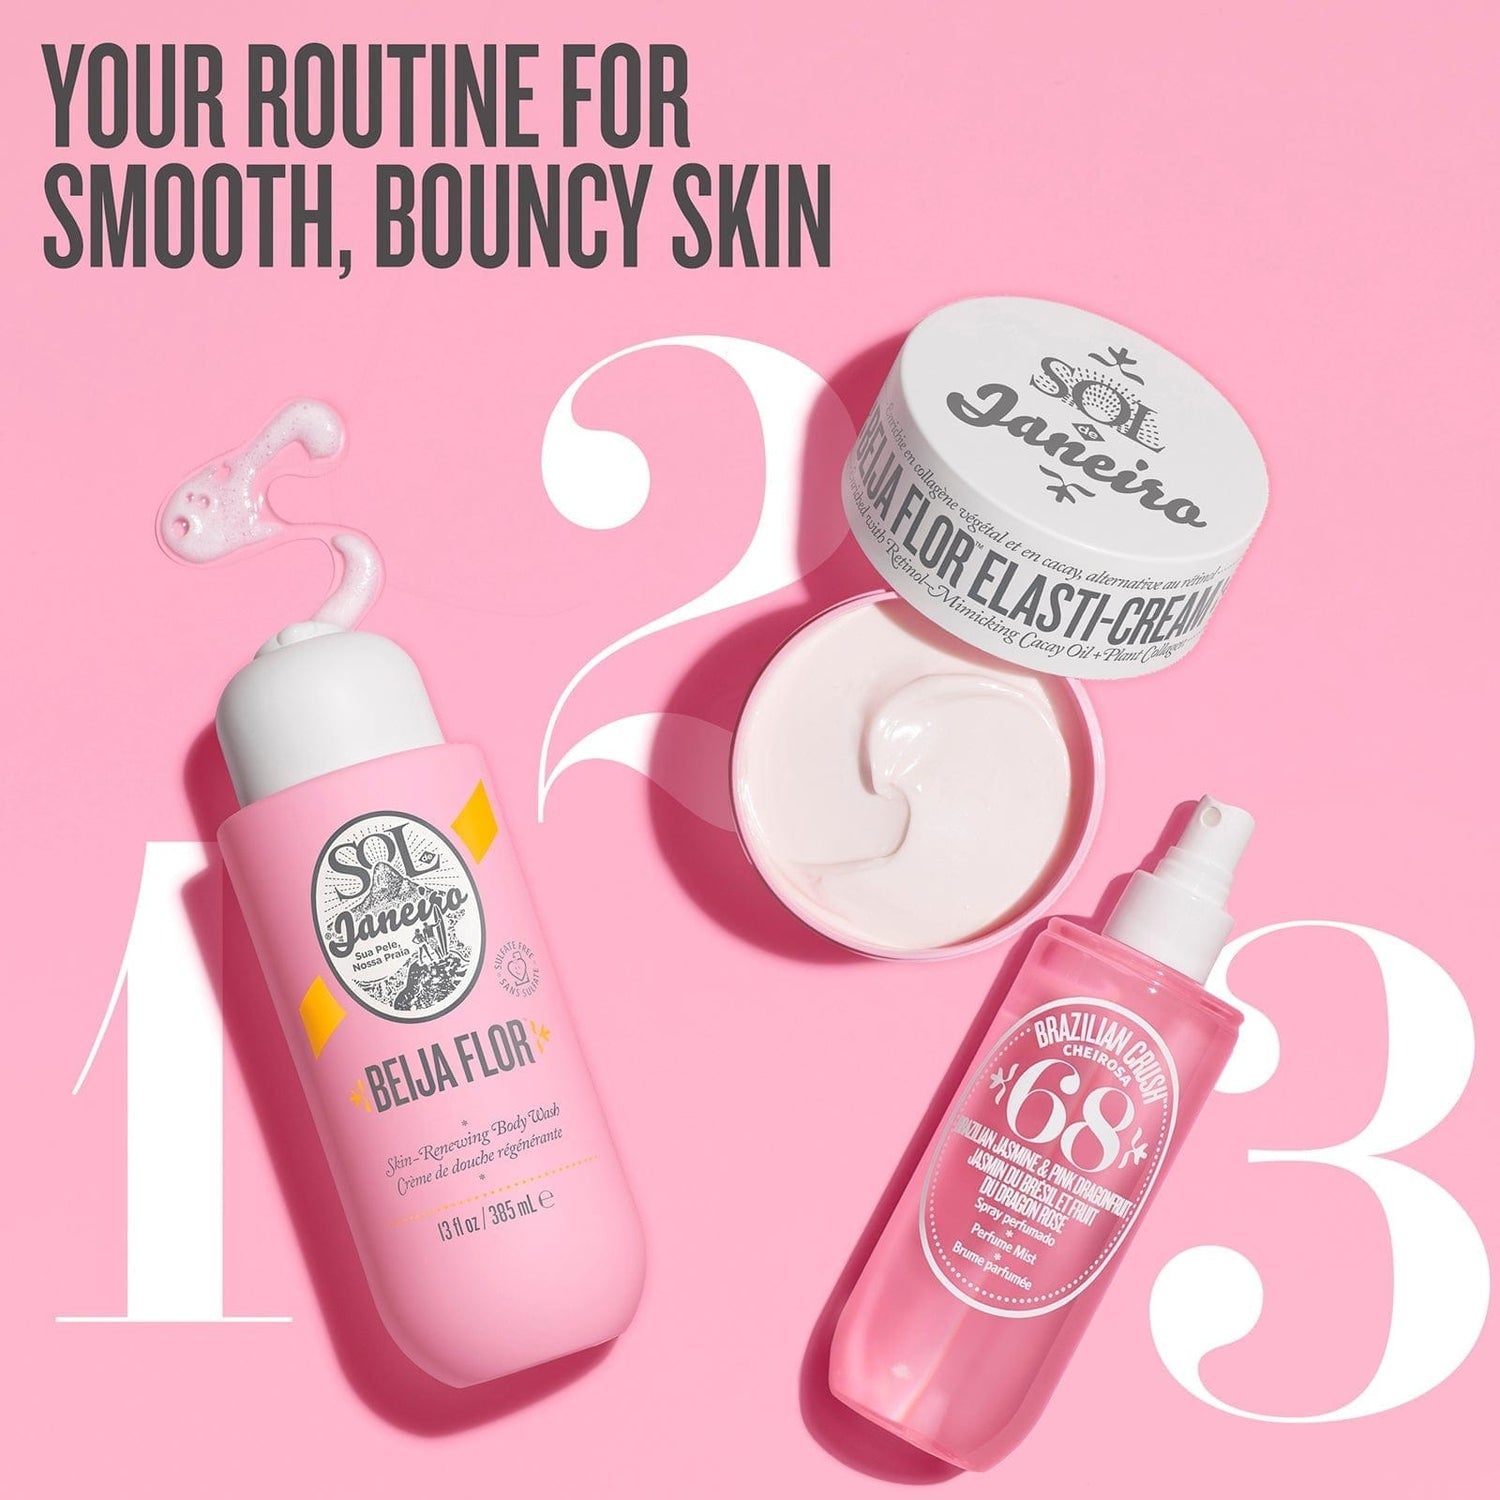 Your routine for smooth, bouncy skin